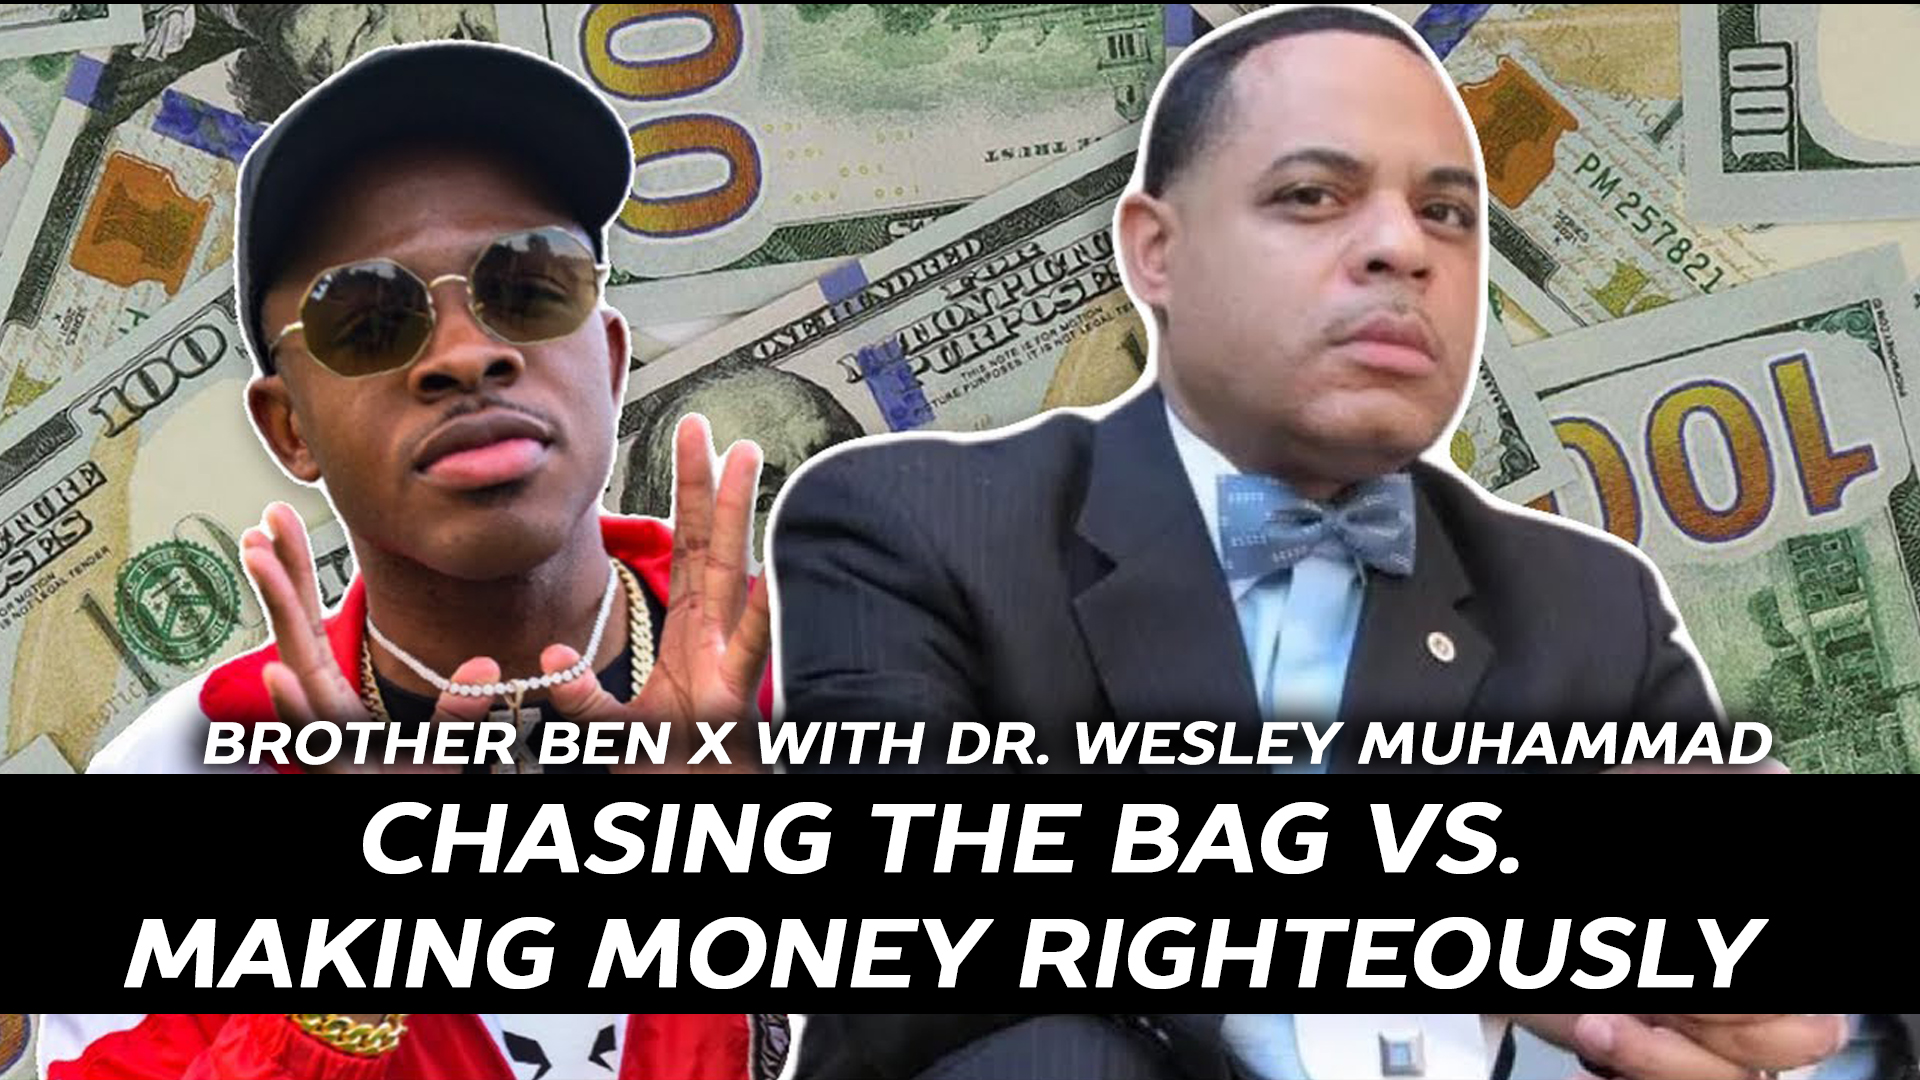 Chasing The Bag Vs. Making Money Righteously